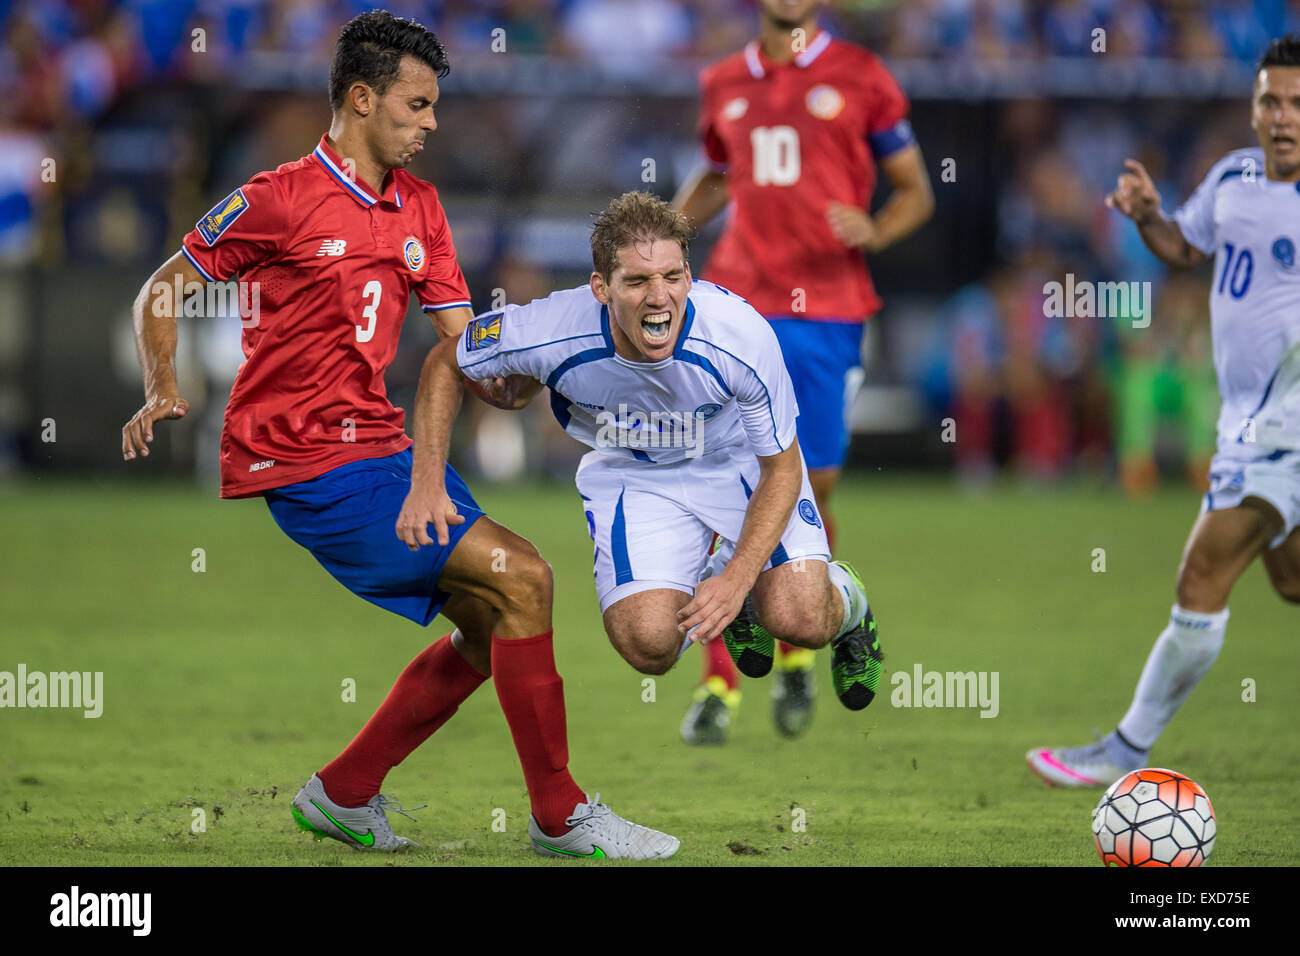 Houston, Texas, USA. 11th July, 2015. El Salvador midfielder Pablo Punyed (20) gets fouled by Costa Rica defender Giancarlo Gonzalez (3) during the 2nd half of an international CONCACAF Gold Cup soccer match between Costa Rica and El Salvador at BBVA Compass Stadium in Houston, TX. The game ended in a 1-1 draw. Credit:  Cal Sport Media/Alamy Live News Stock Photo